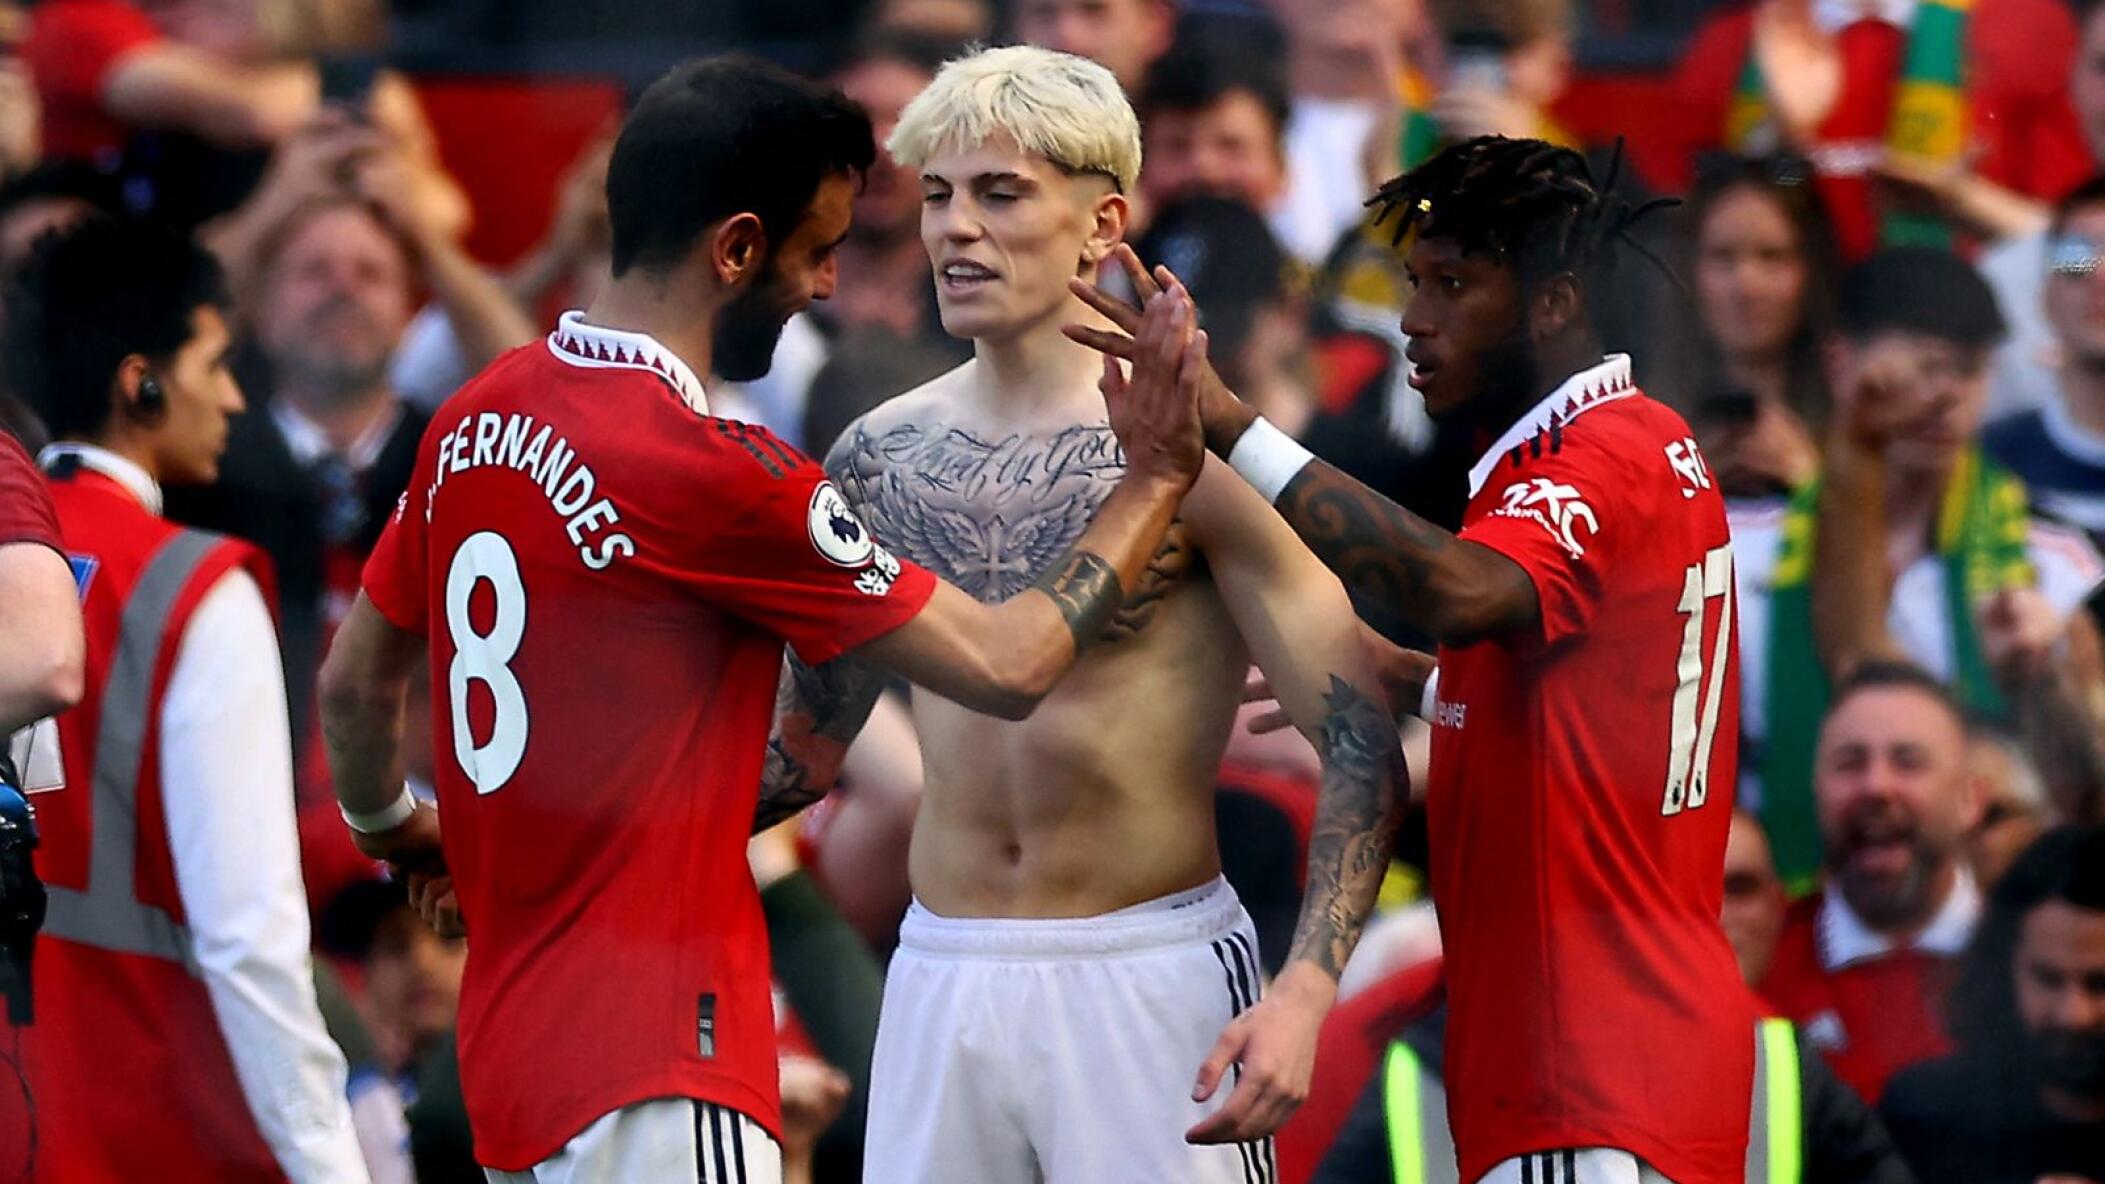 Manchester United's Alejandro Garnacho celebrates with teammates after scoring a goal during their Premier League game against Wolverhampton Wanderers